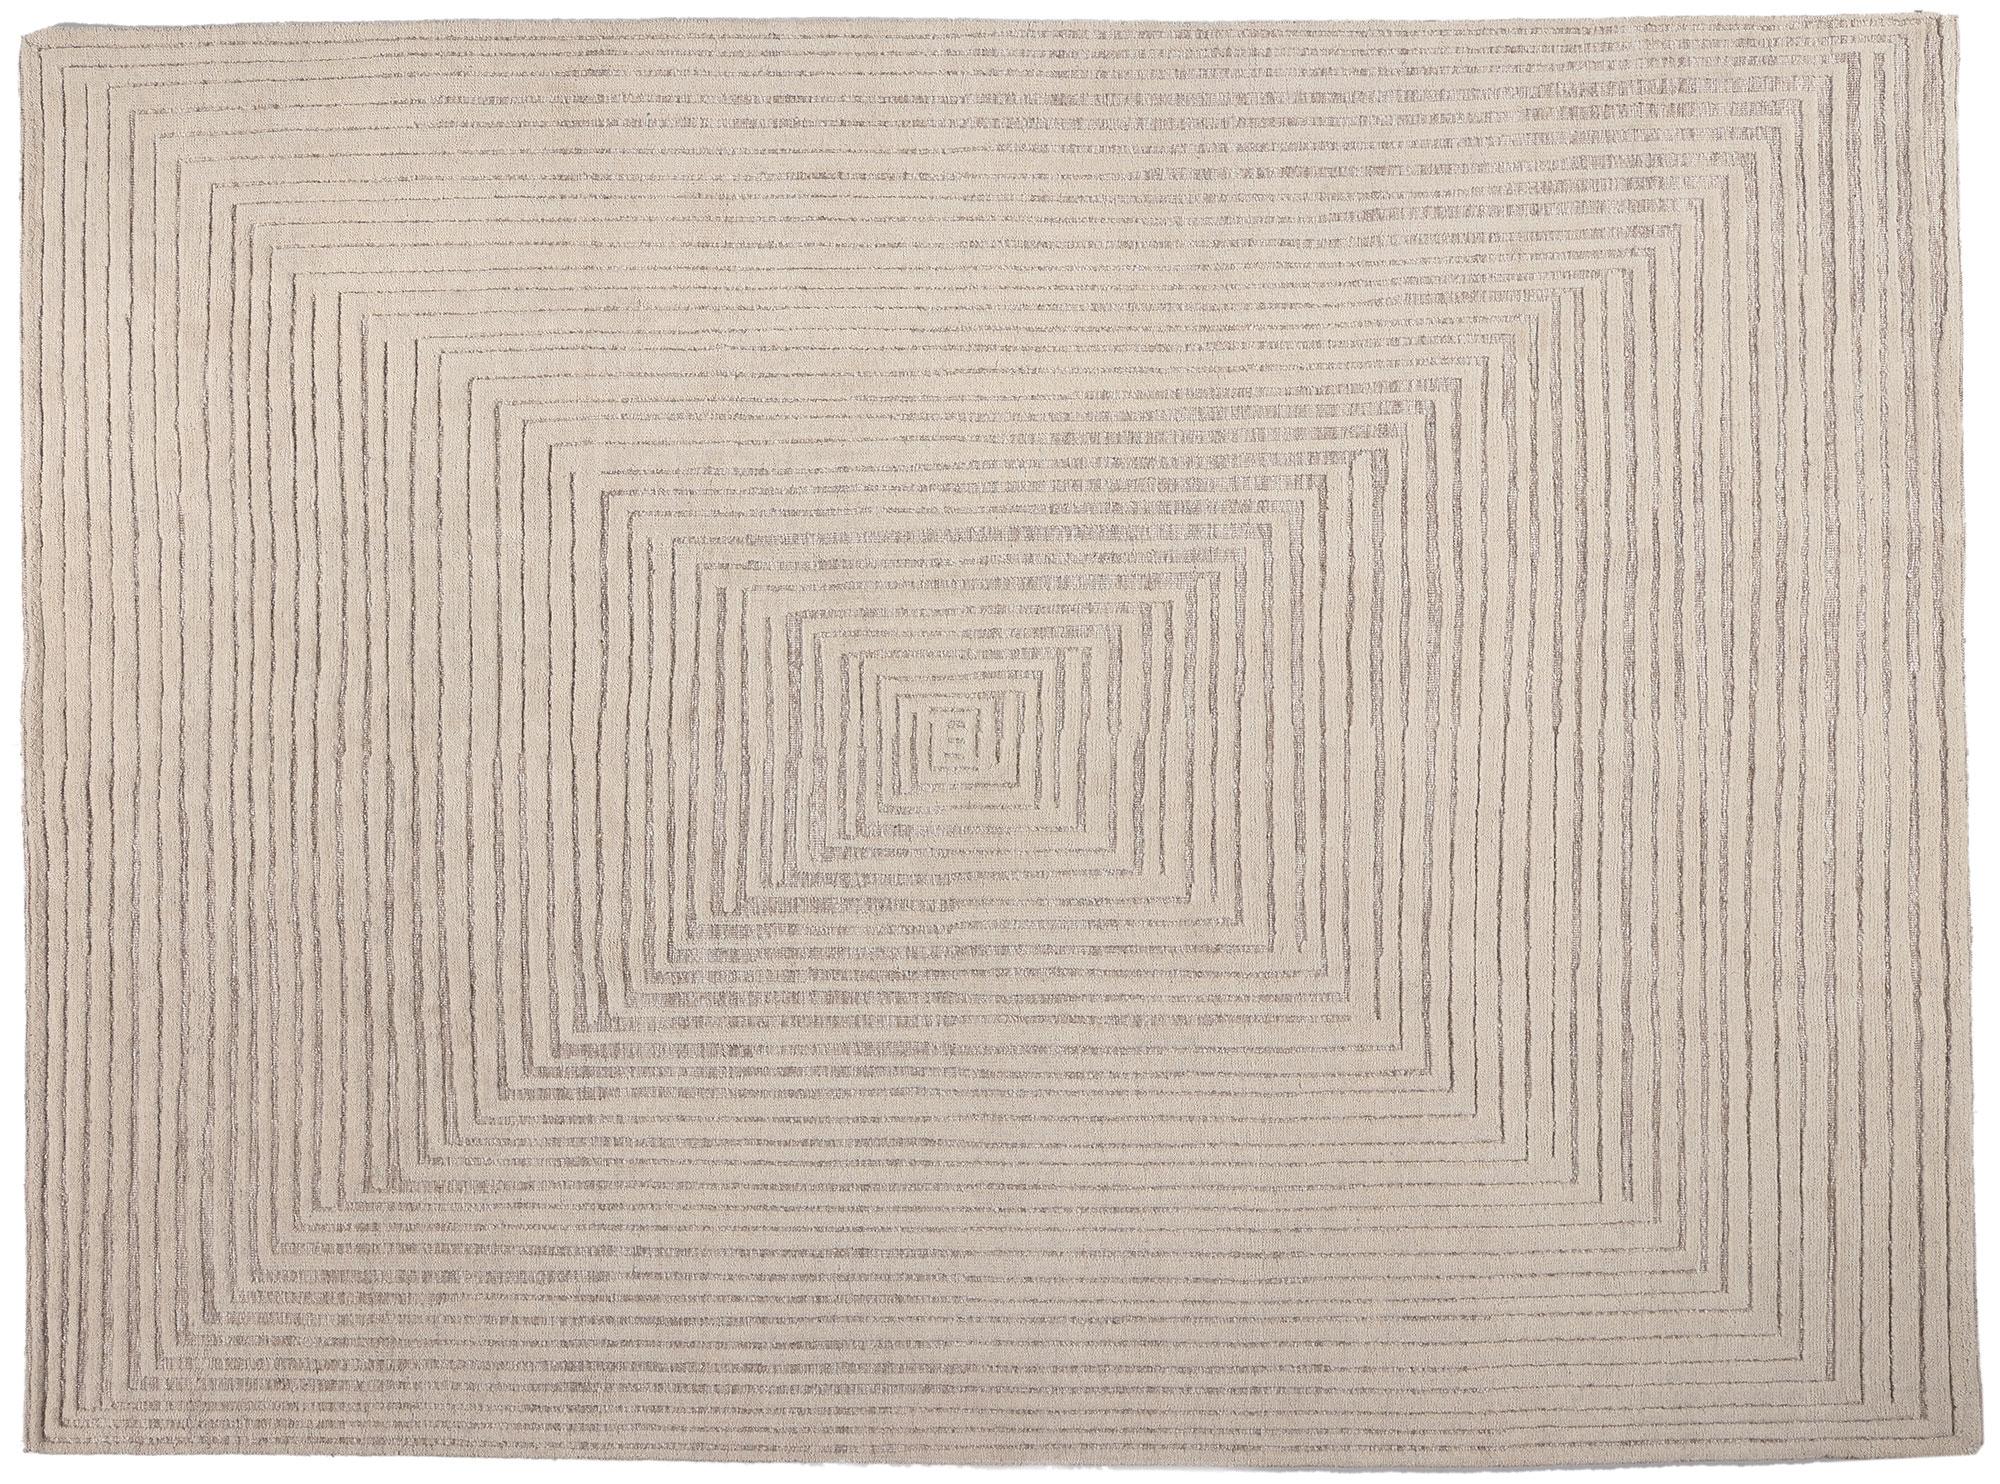 Modern Textured High-Low Rug, Sublime Simplicity Meets Tantalizing Texture 2